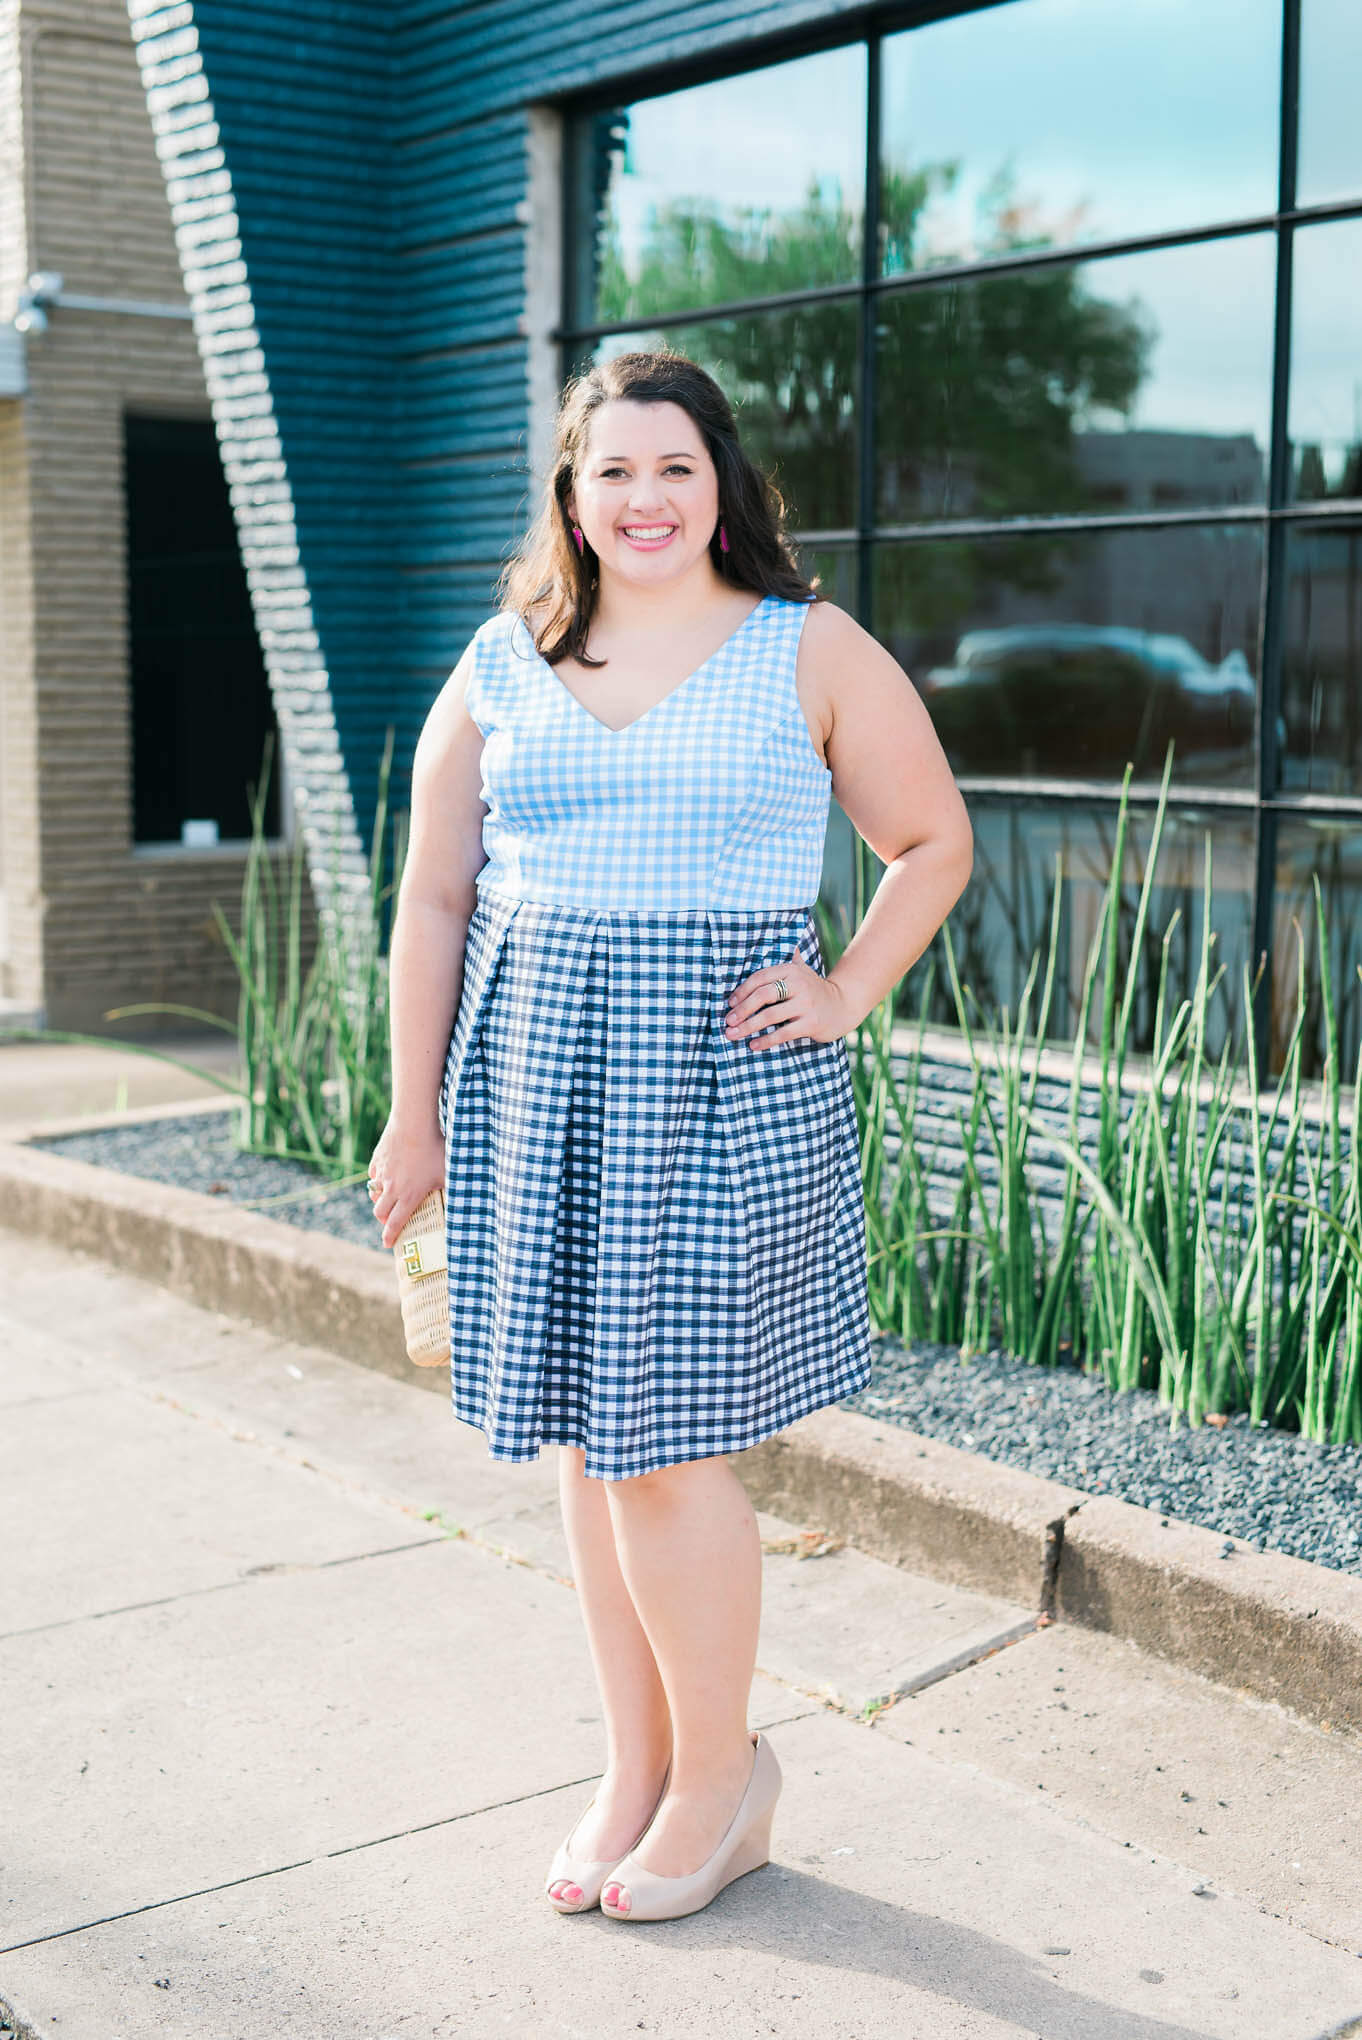 Wedding season is starting to wind down, but I have another wedding attire post to share with you for those cooler weather fall weddings. - Something Gold, Something Blue a curvy style blog by Emily Bastedo